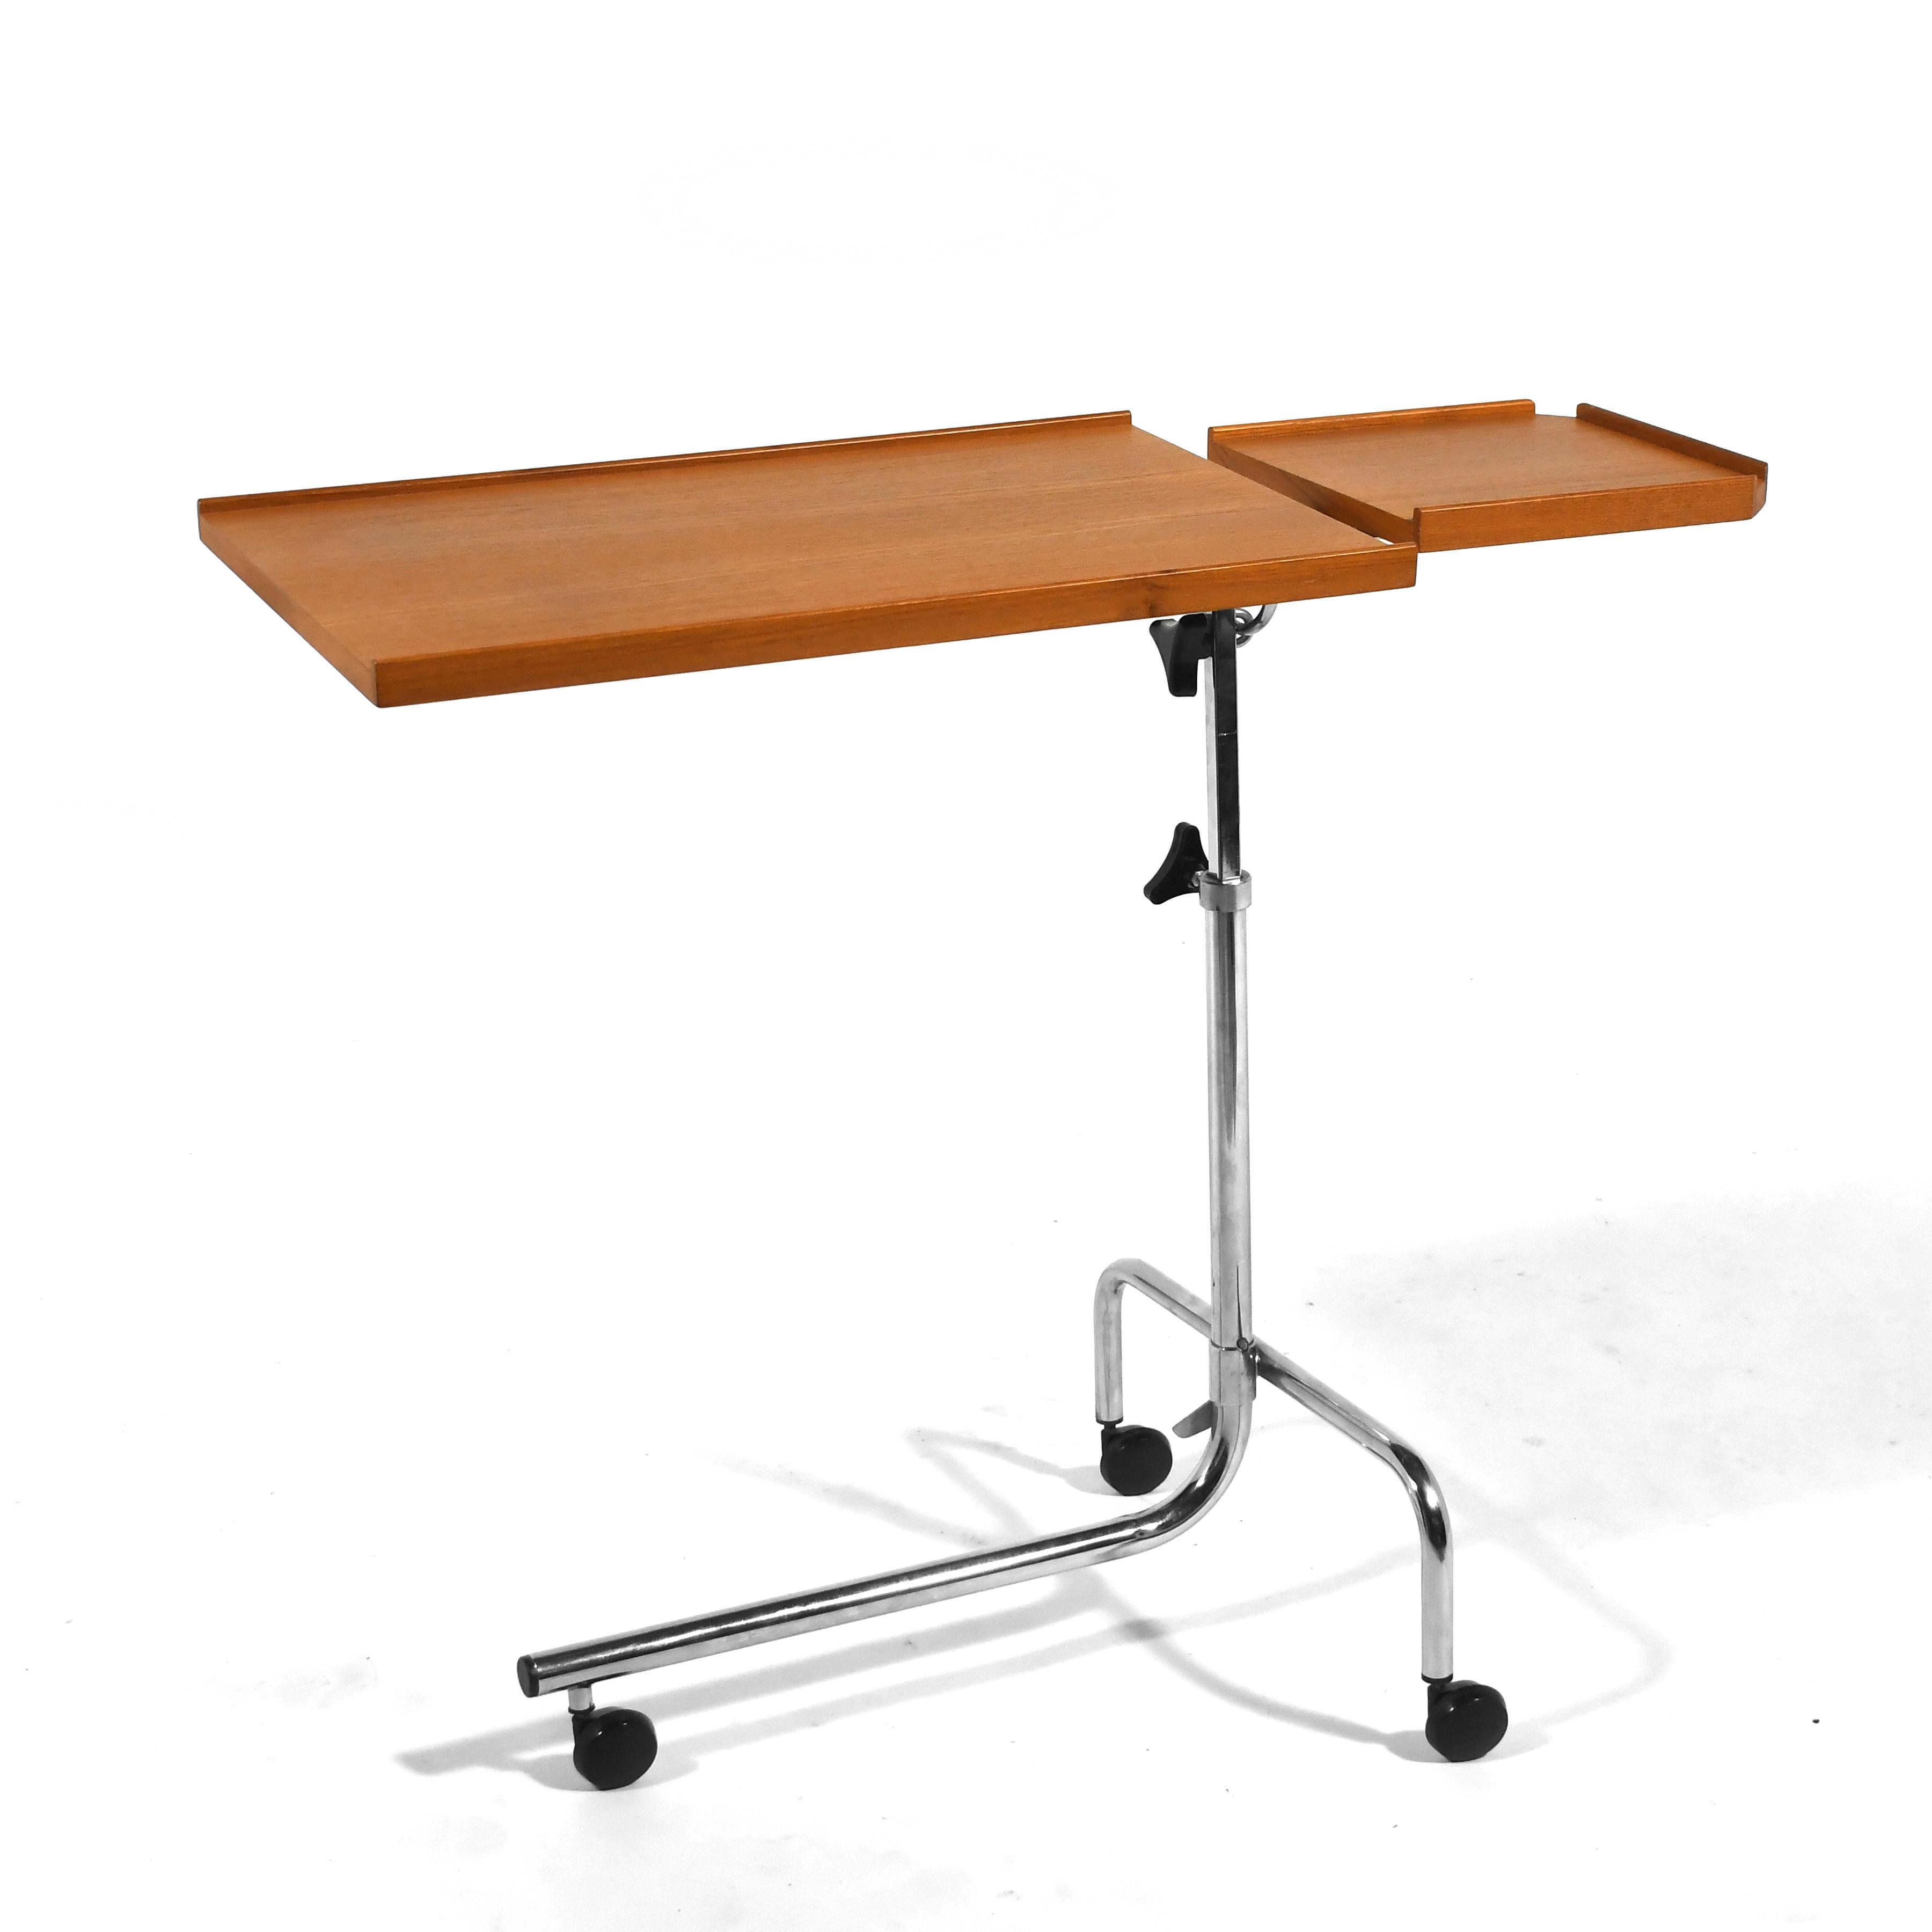 We consider this terrific Läsbord adjustable tray table by Danecastle a 